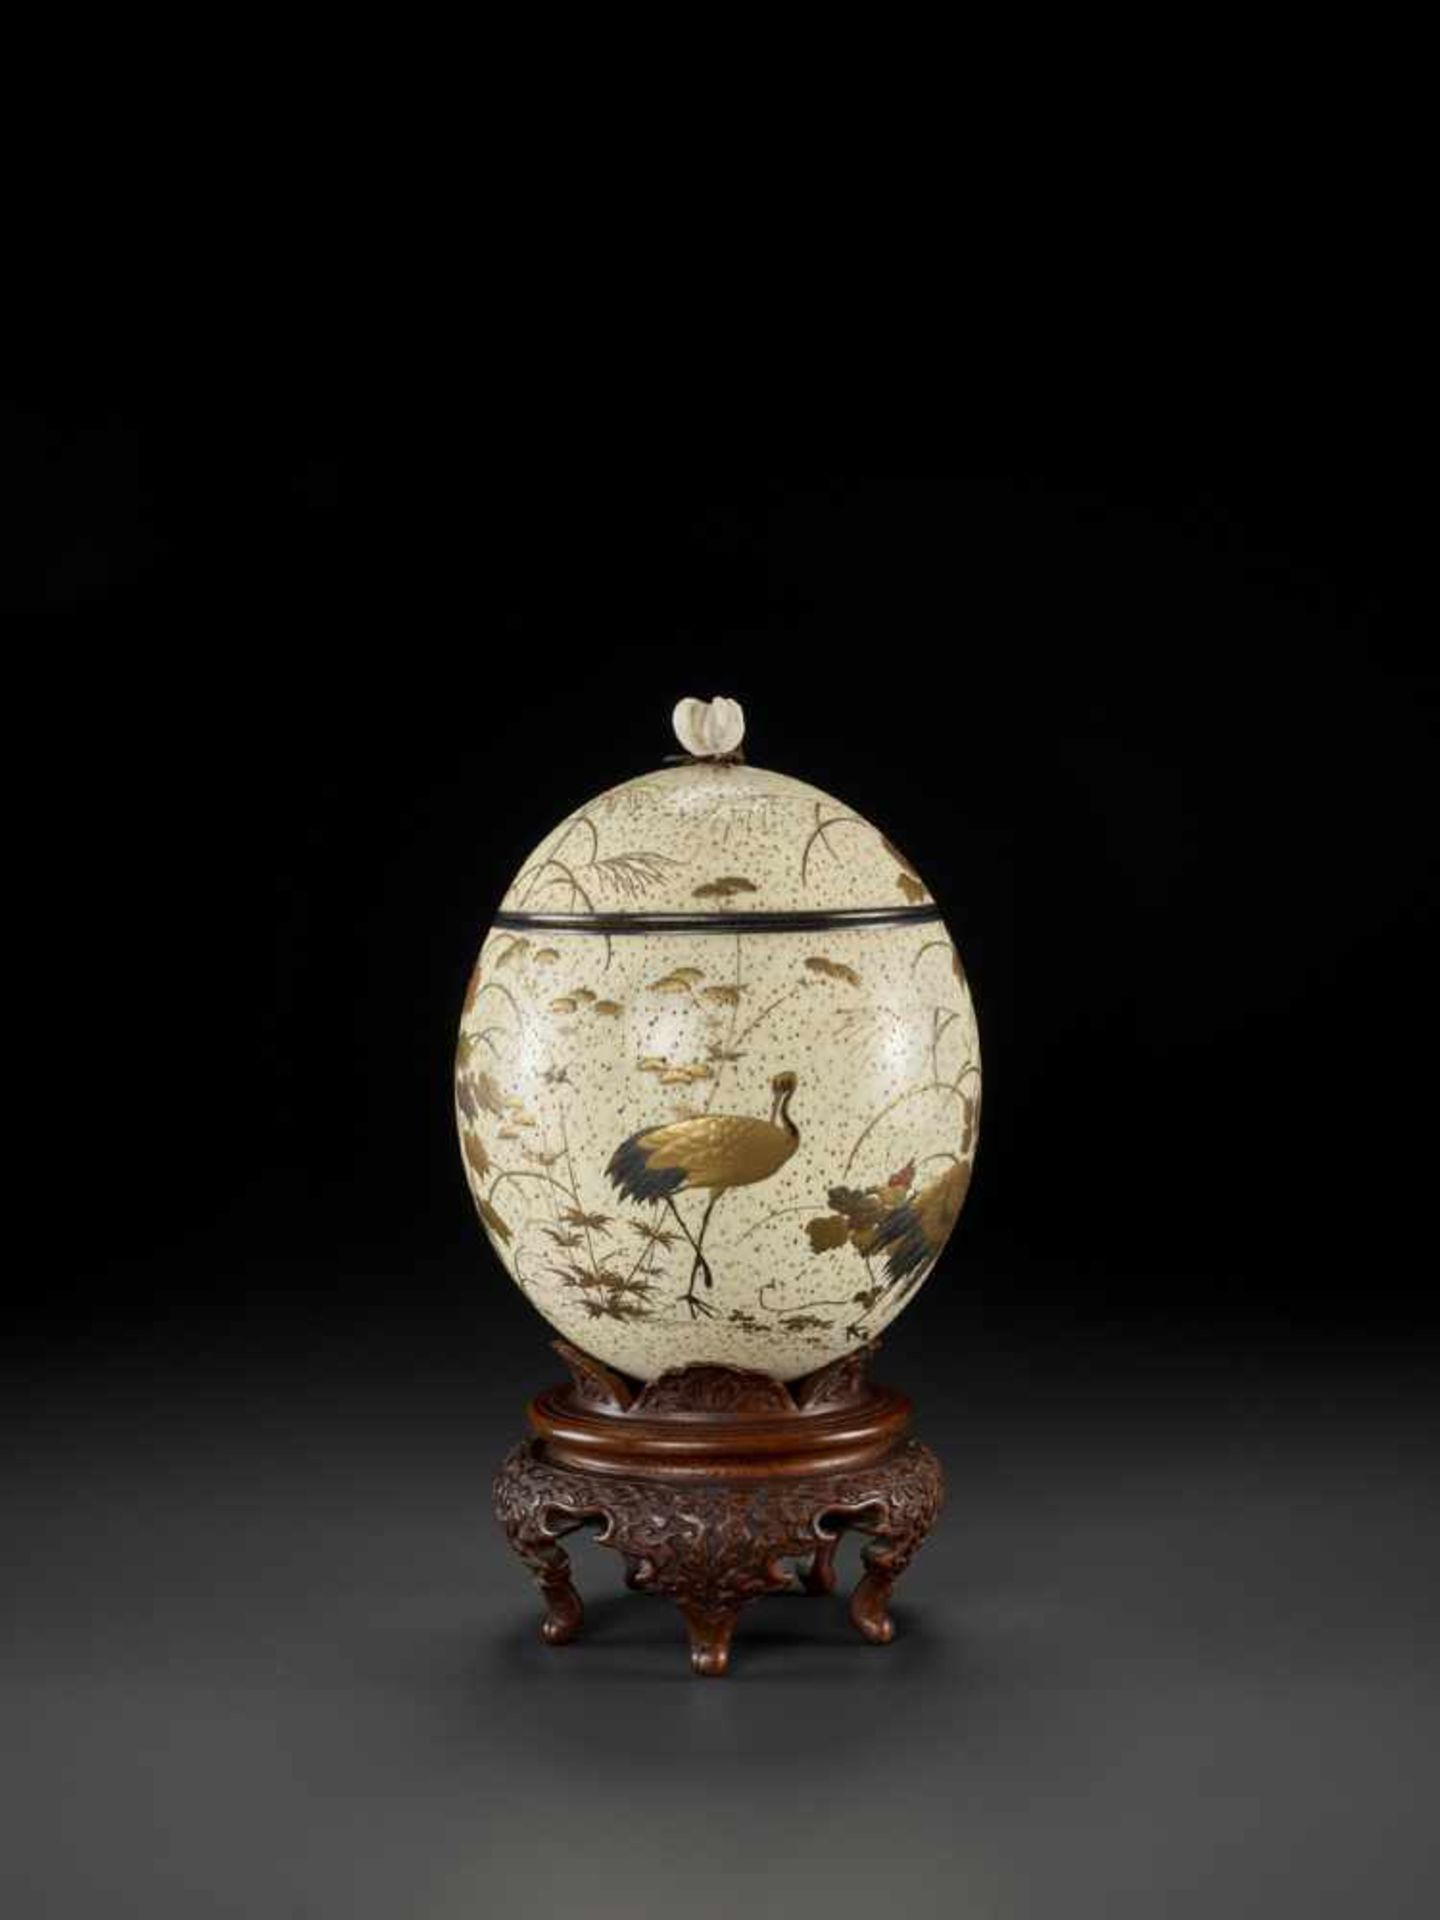 A FINELY LACQUERED OSTRICH EGG Japan, late 19th century, Meiji period (1868-1912)The speckled egg is - Bild 3 aus 10